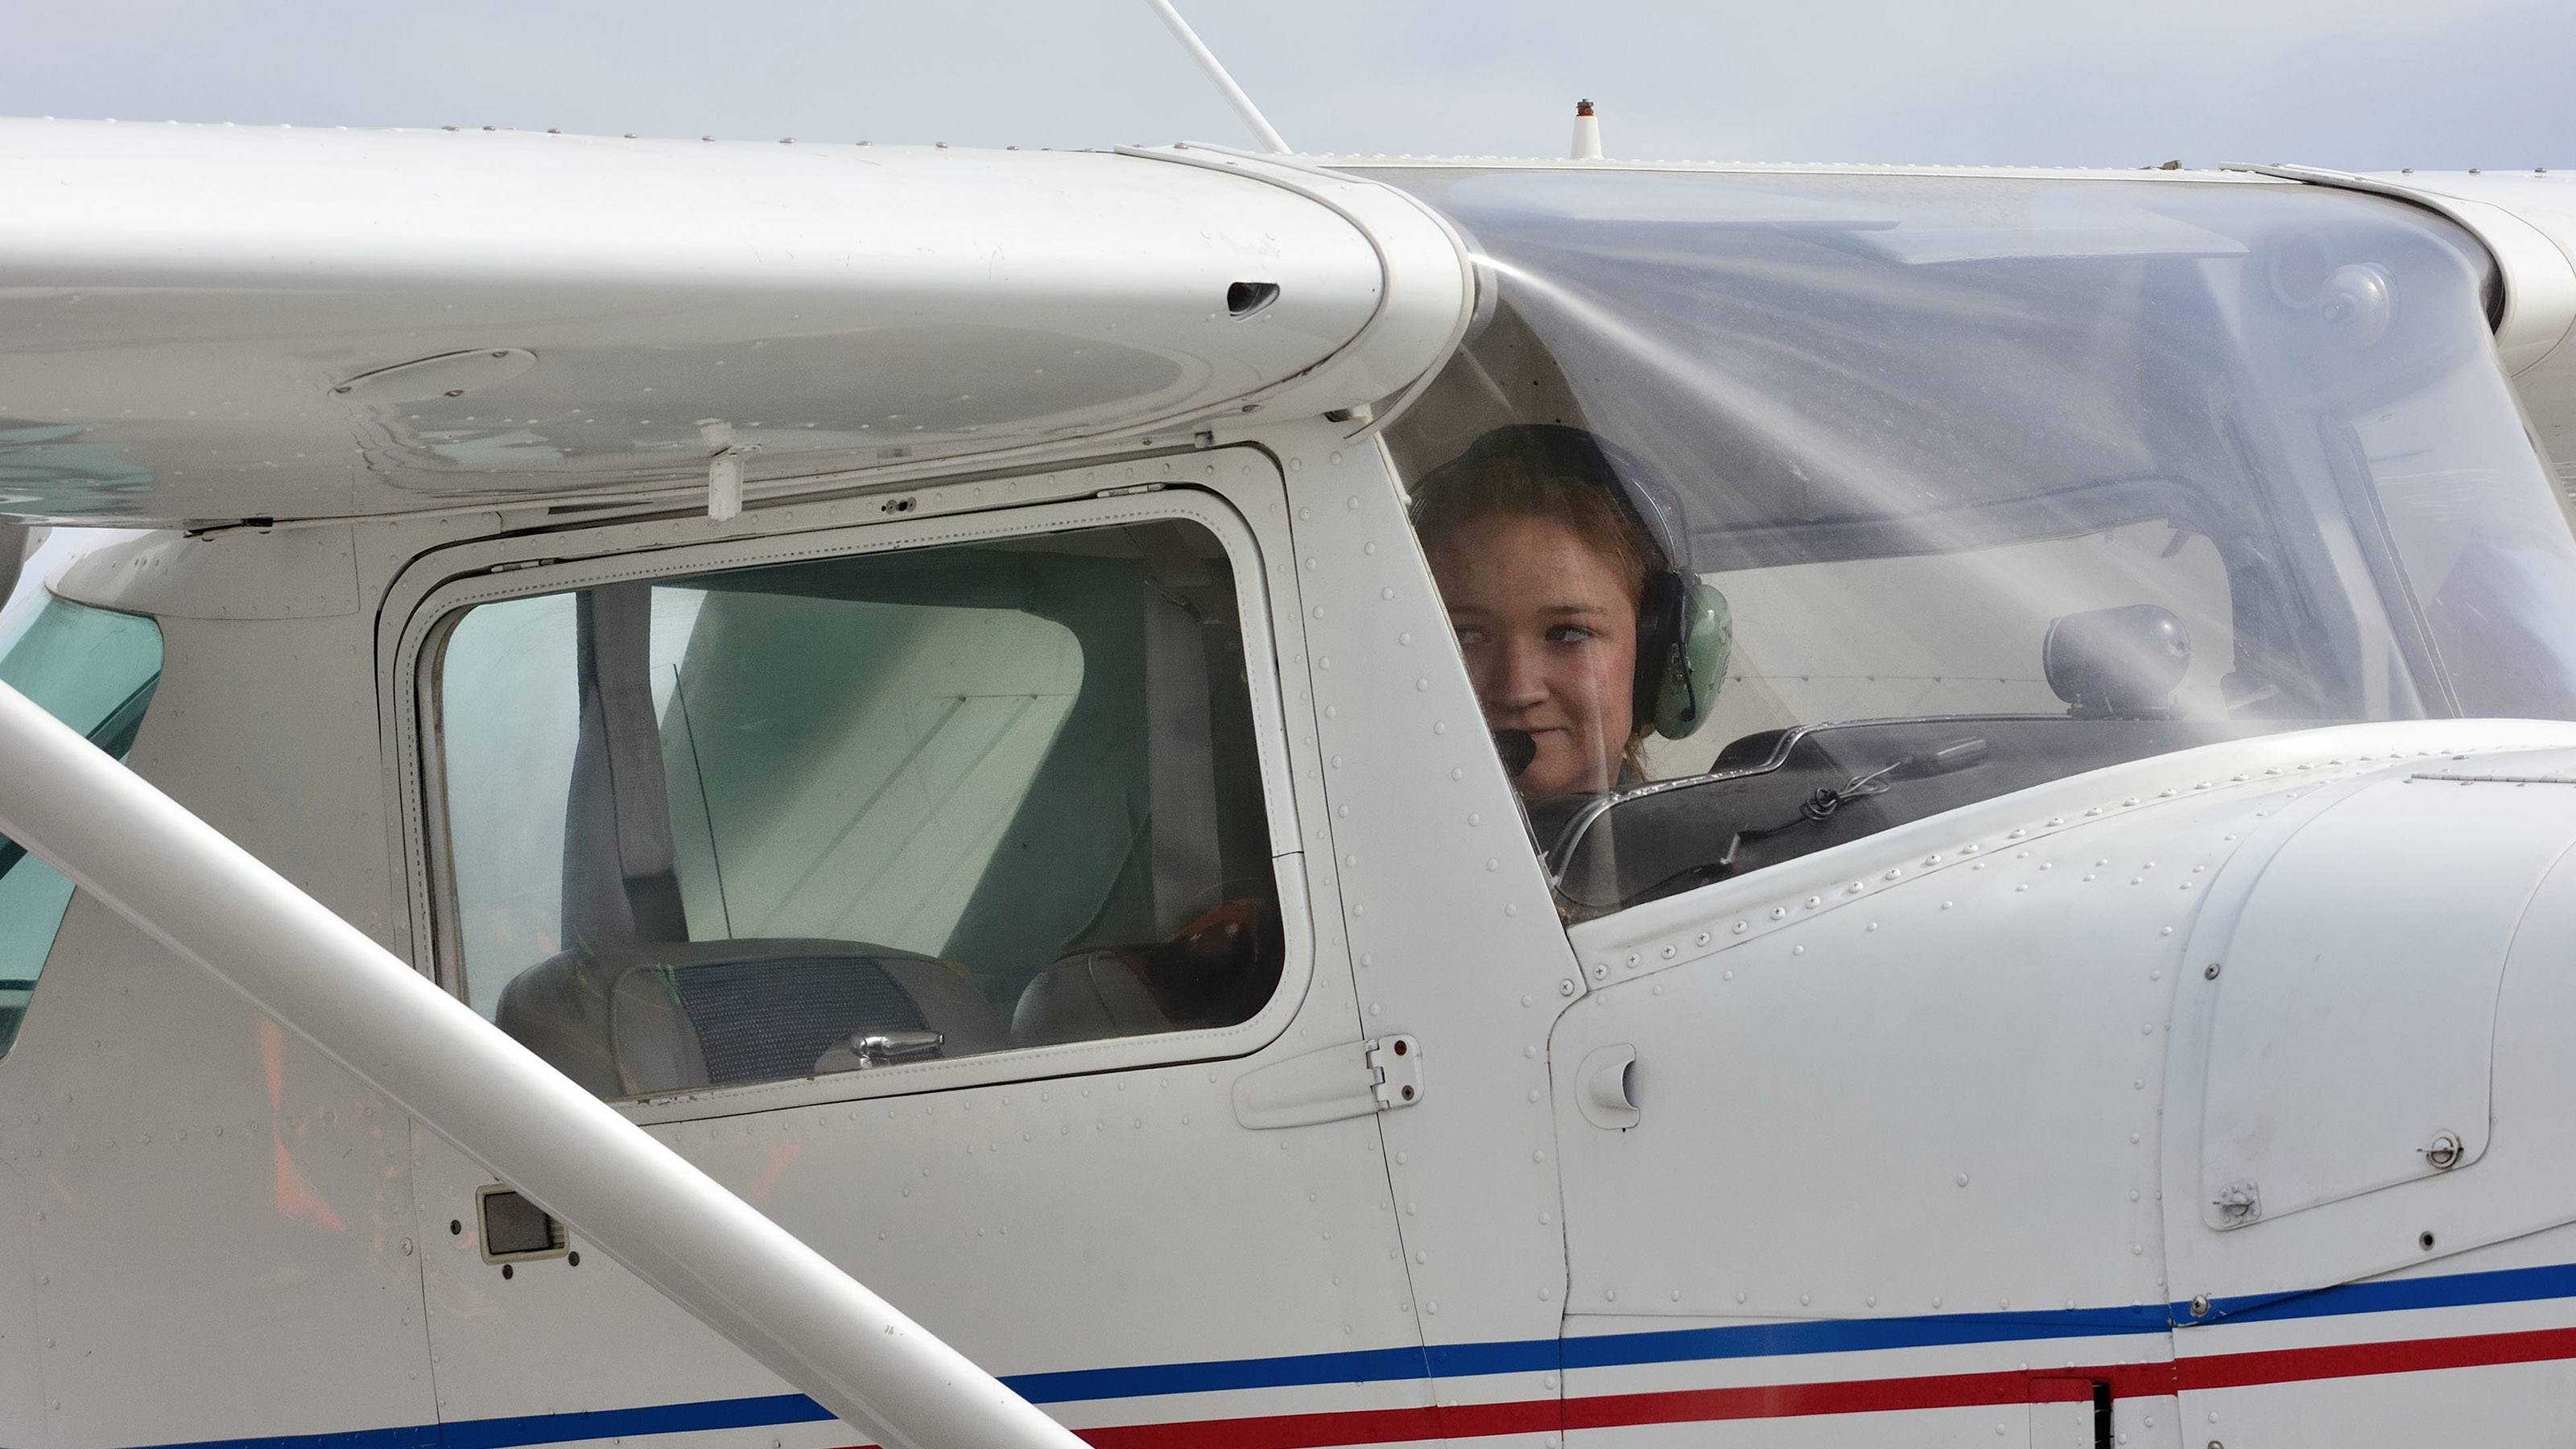 Lydia Jacobs, 19, of Corinth, Maine, waits in her Cessna 150 for the signal to take off. Jacobs flew 60 hours, over 17 days, to get to Alaska. Although she didn't win her class in the 2017 Valdez Fly-In's STOL competition, she posted a 126-foot takeoff and 151-foot landing.